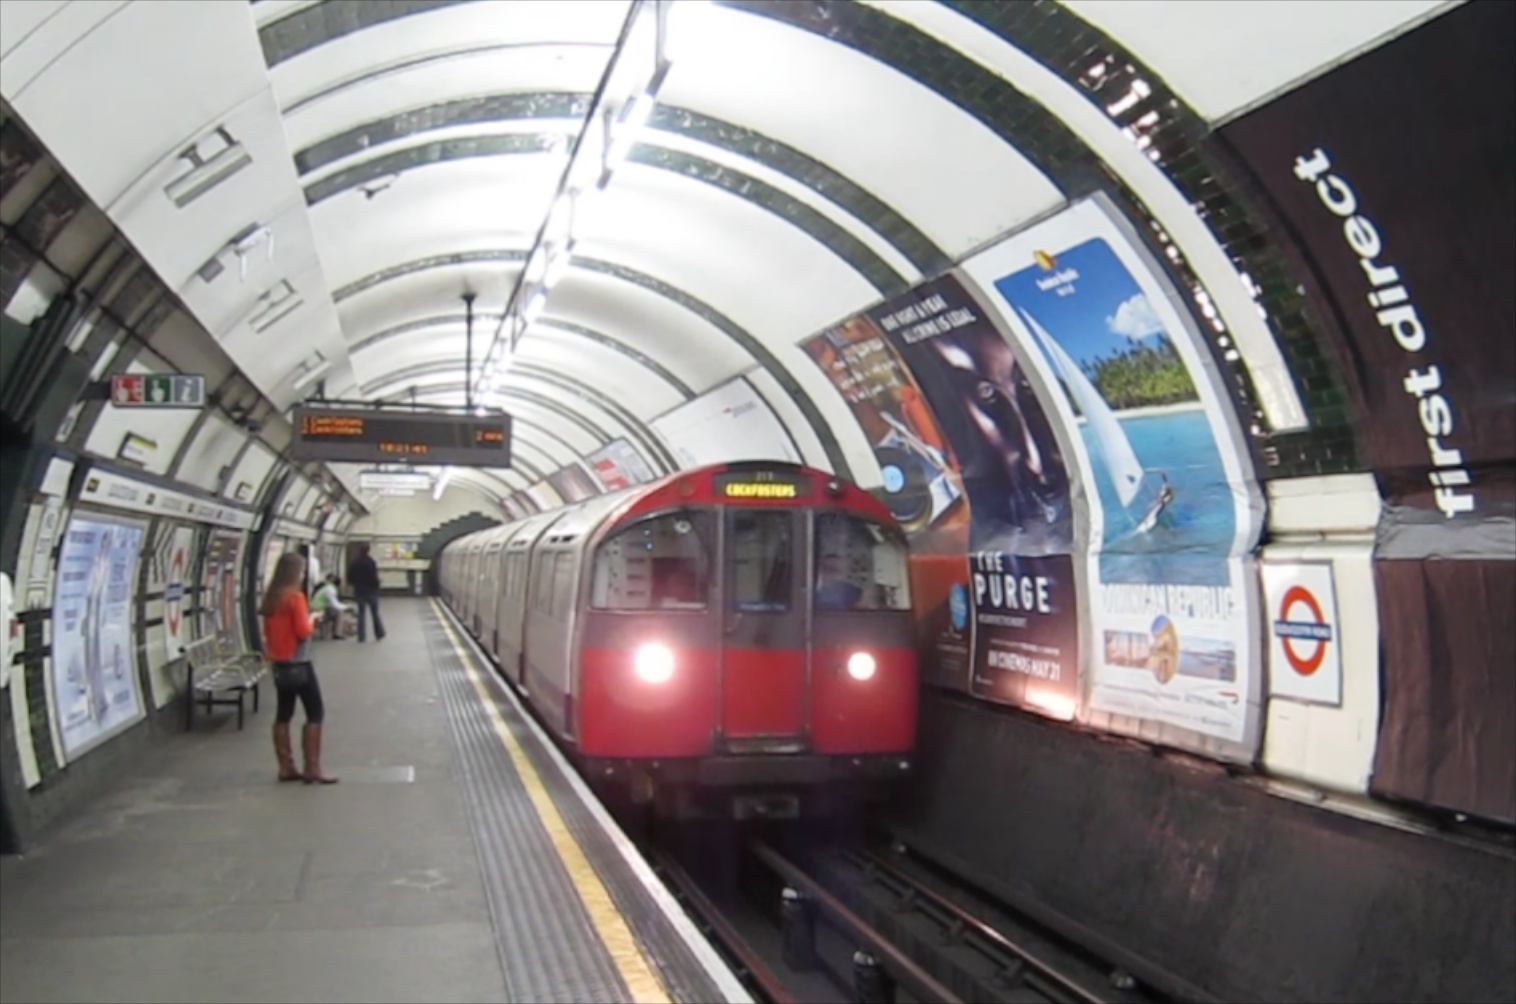 London Underground – London, England « The Touch of Sound